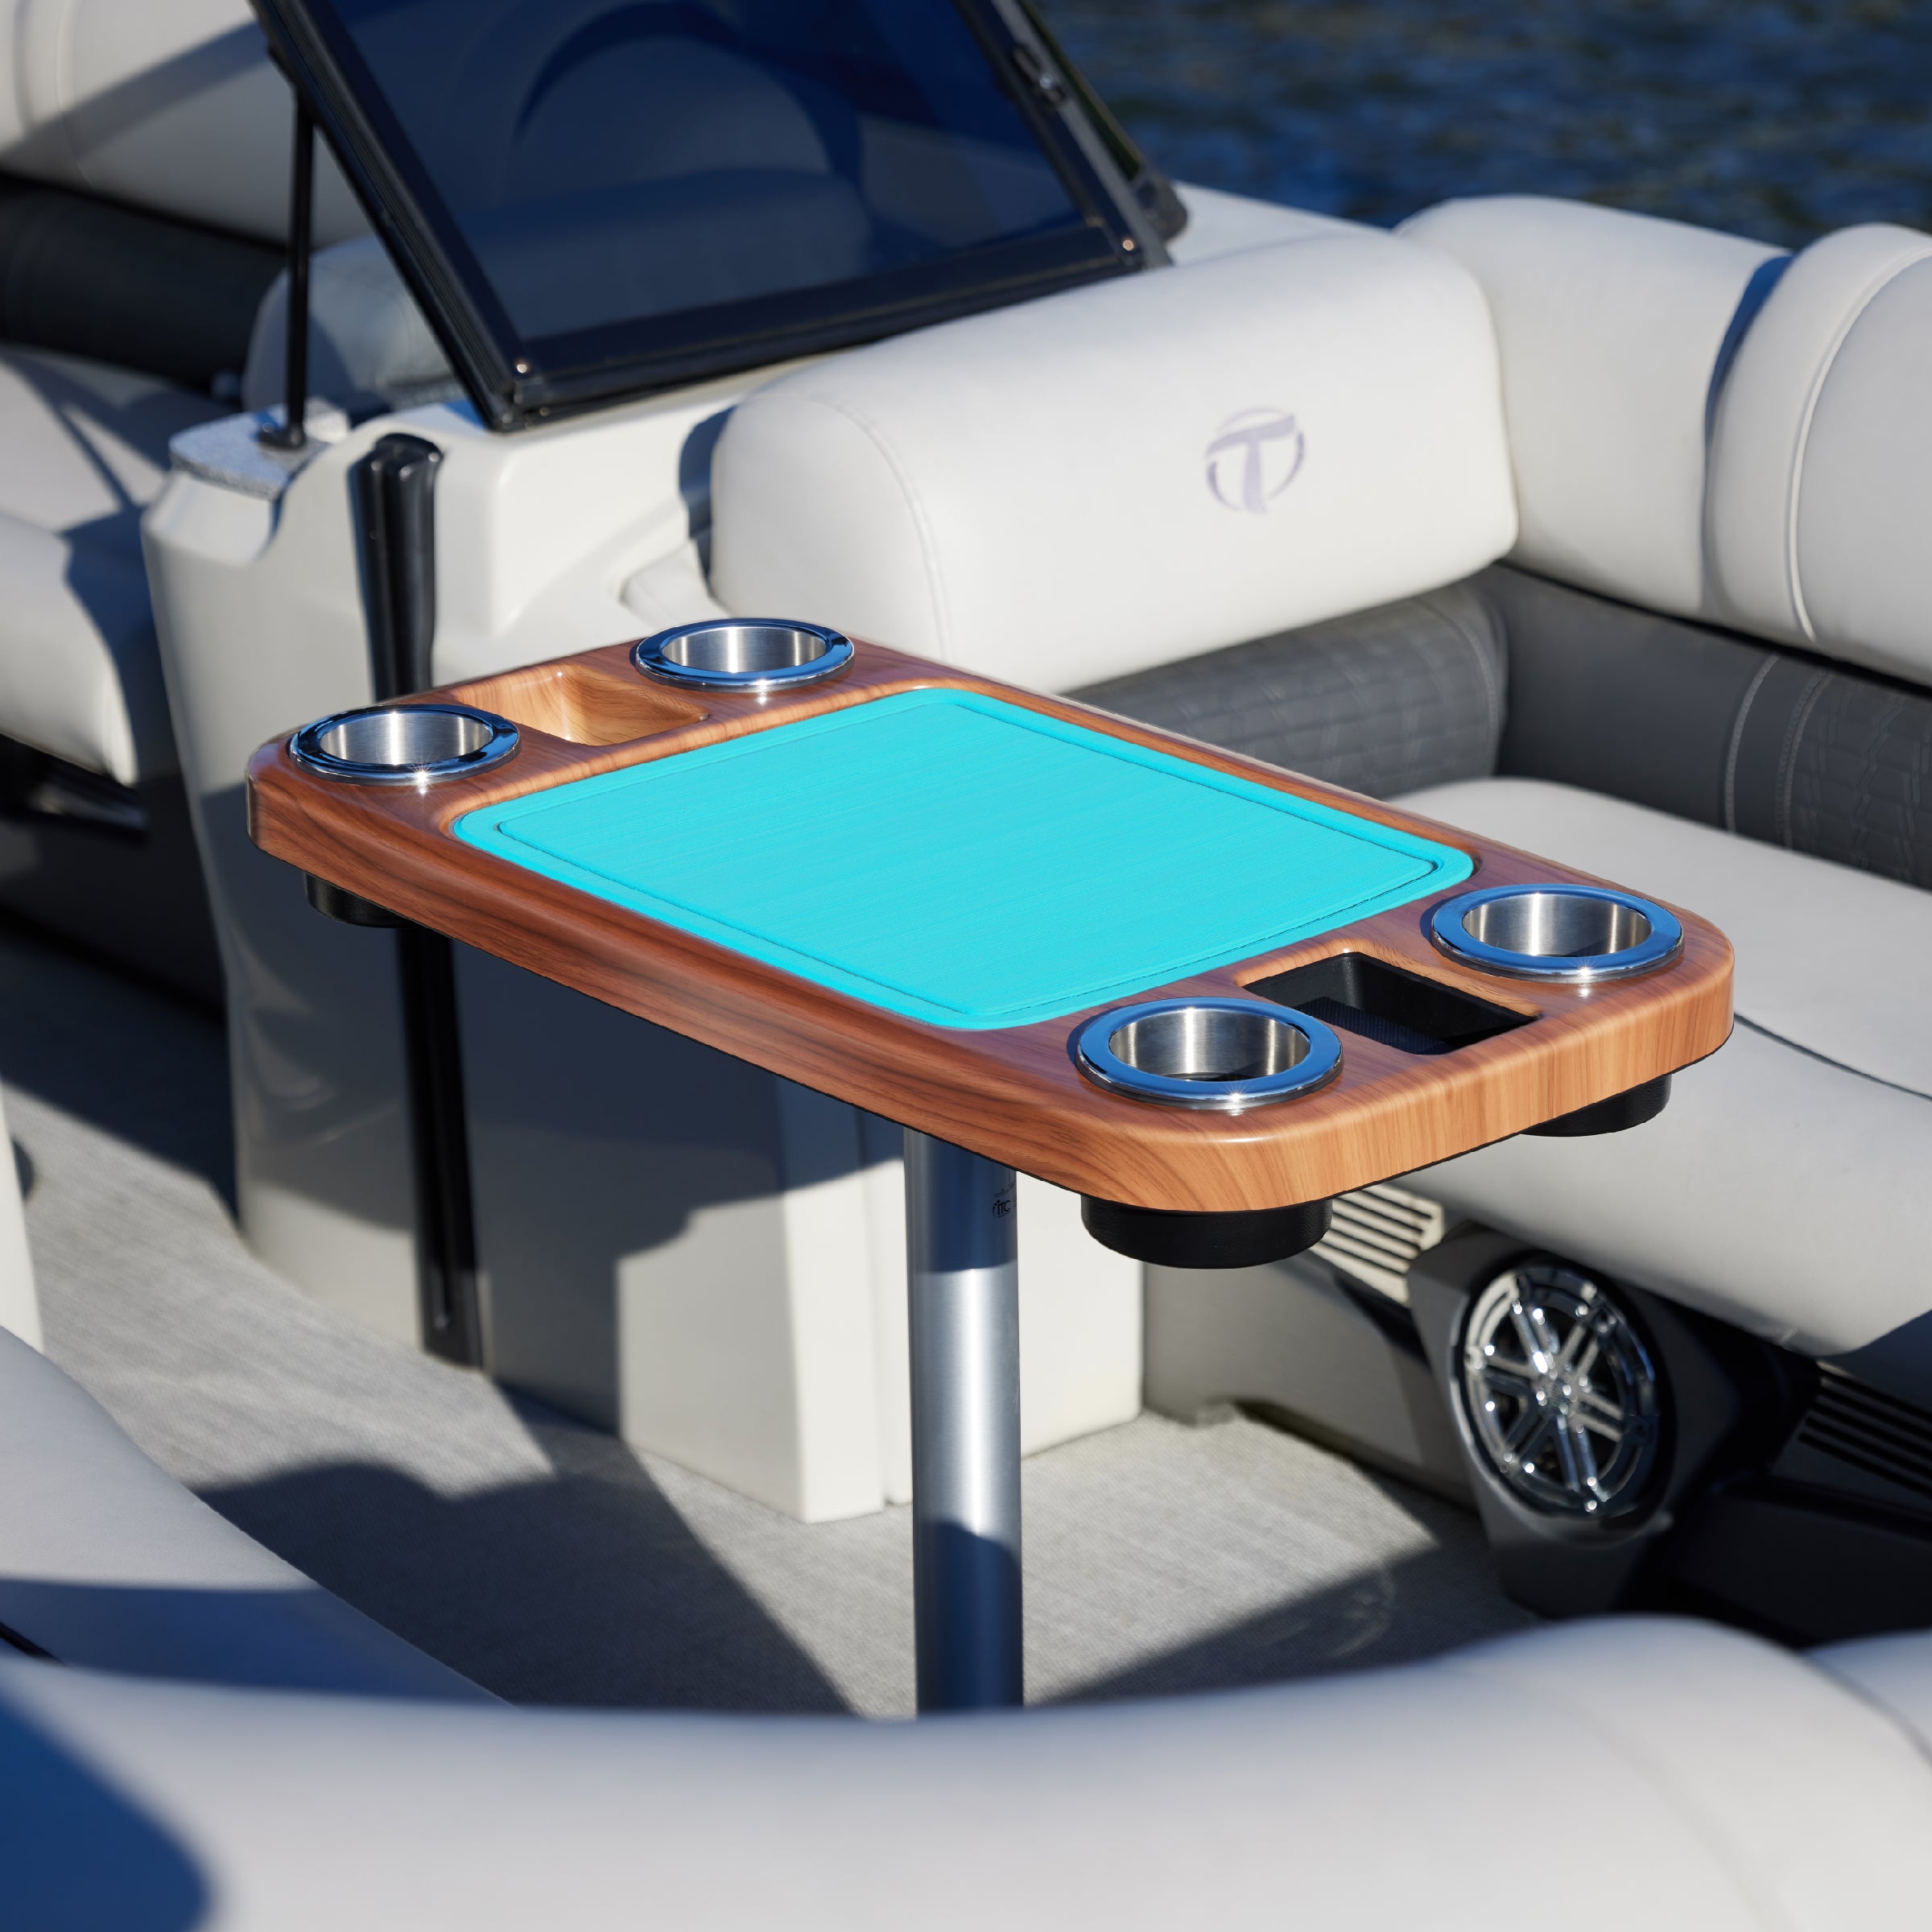 Party Boat Table Center Foam Turquoise Mats | ITC Shop Now